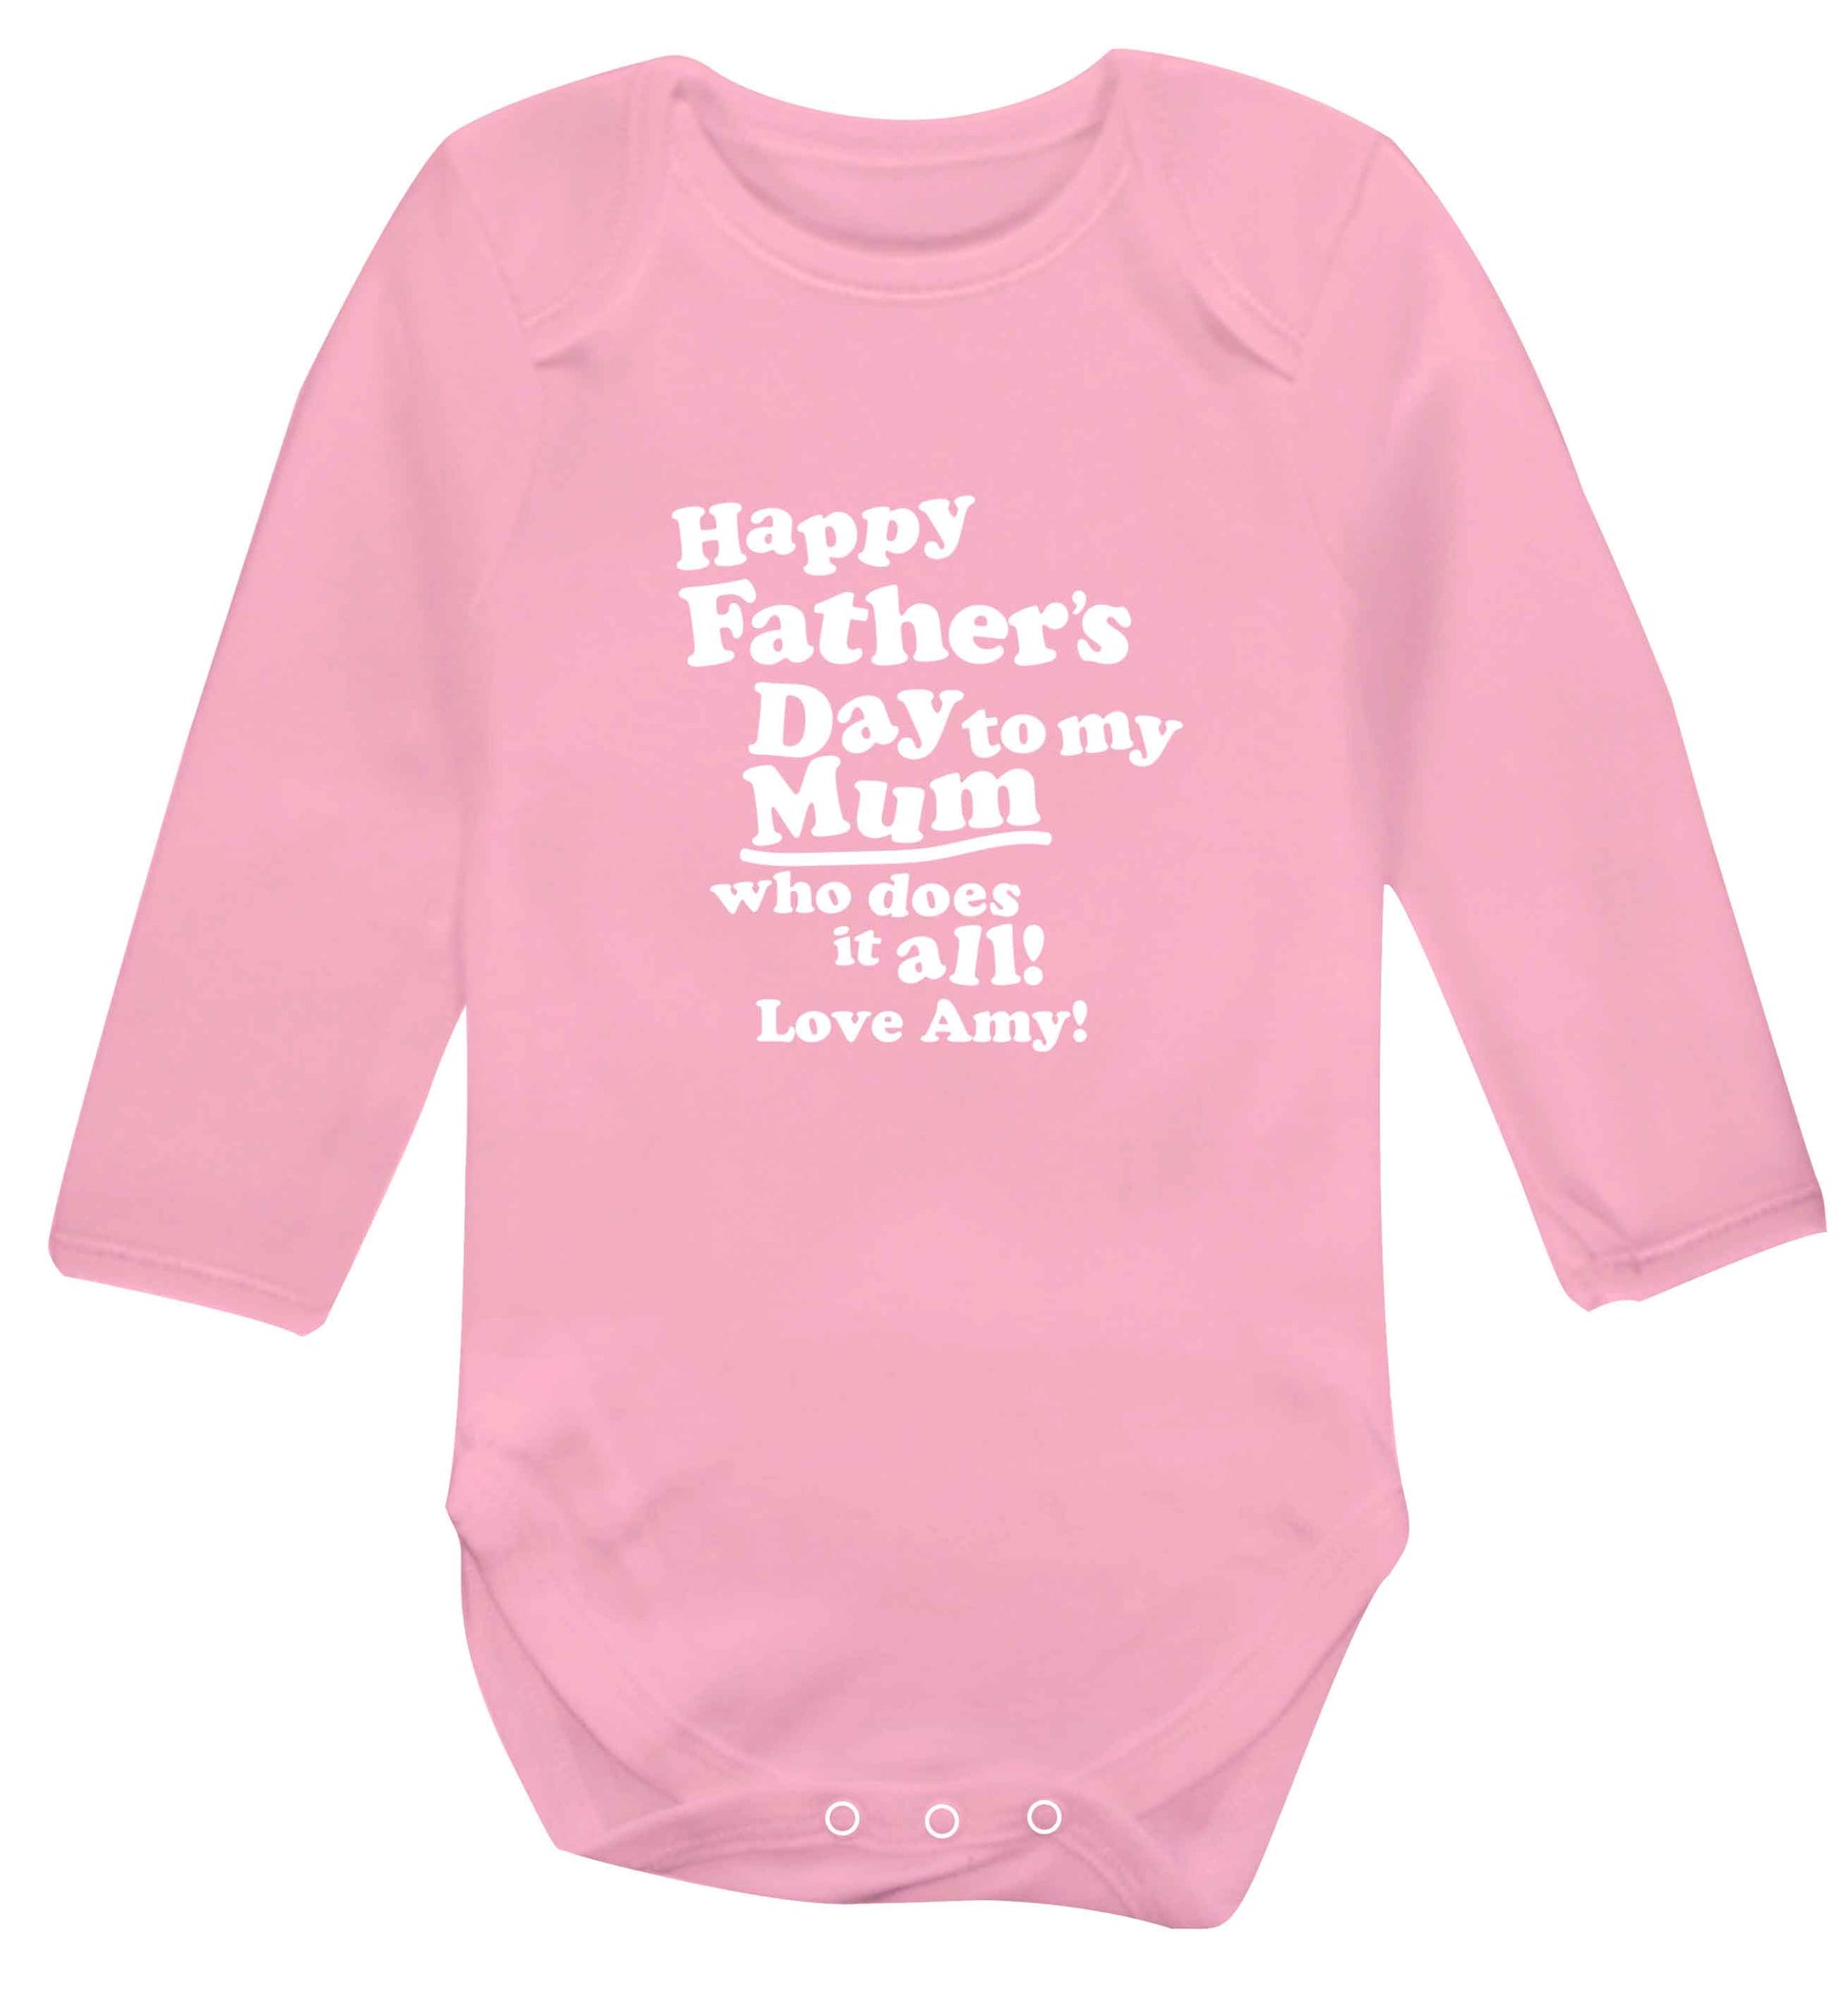 Happy Father's day to my mum who does it all baby vest long sleeved pale pink 6-12 months